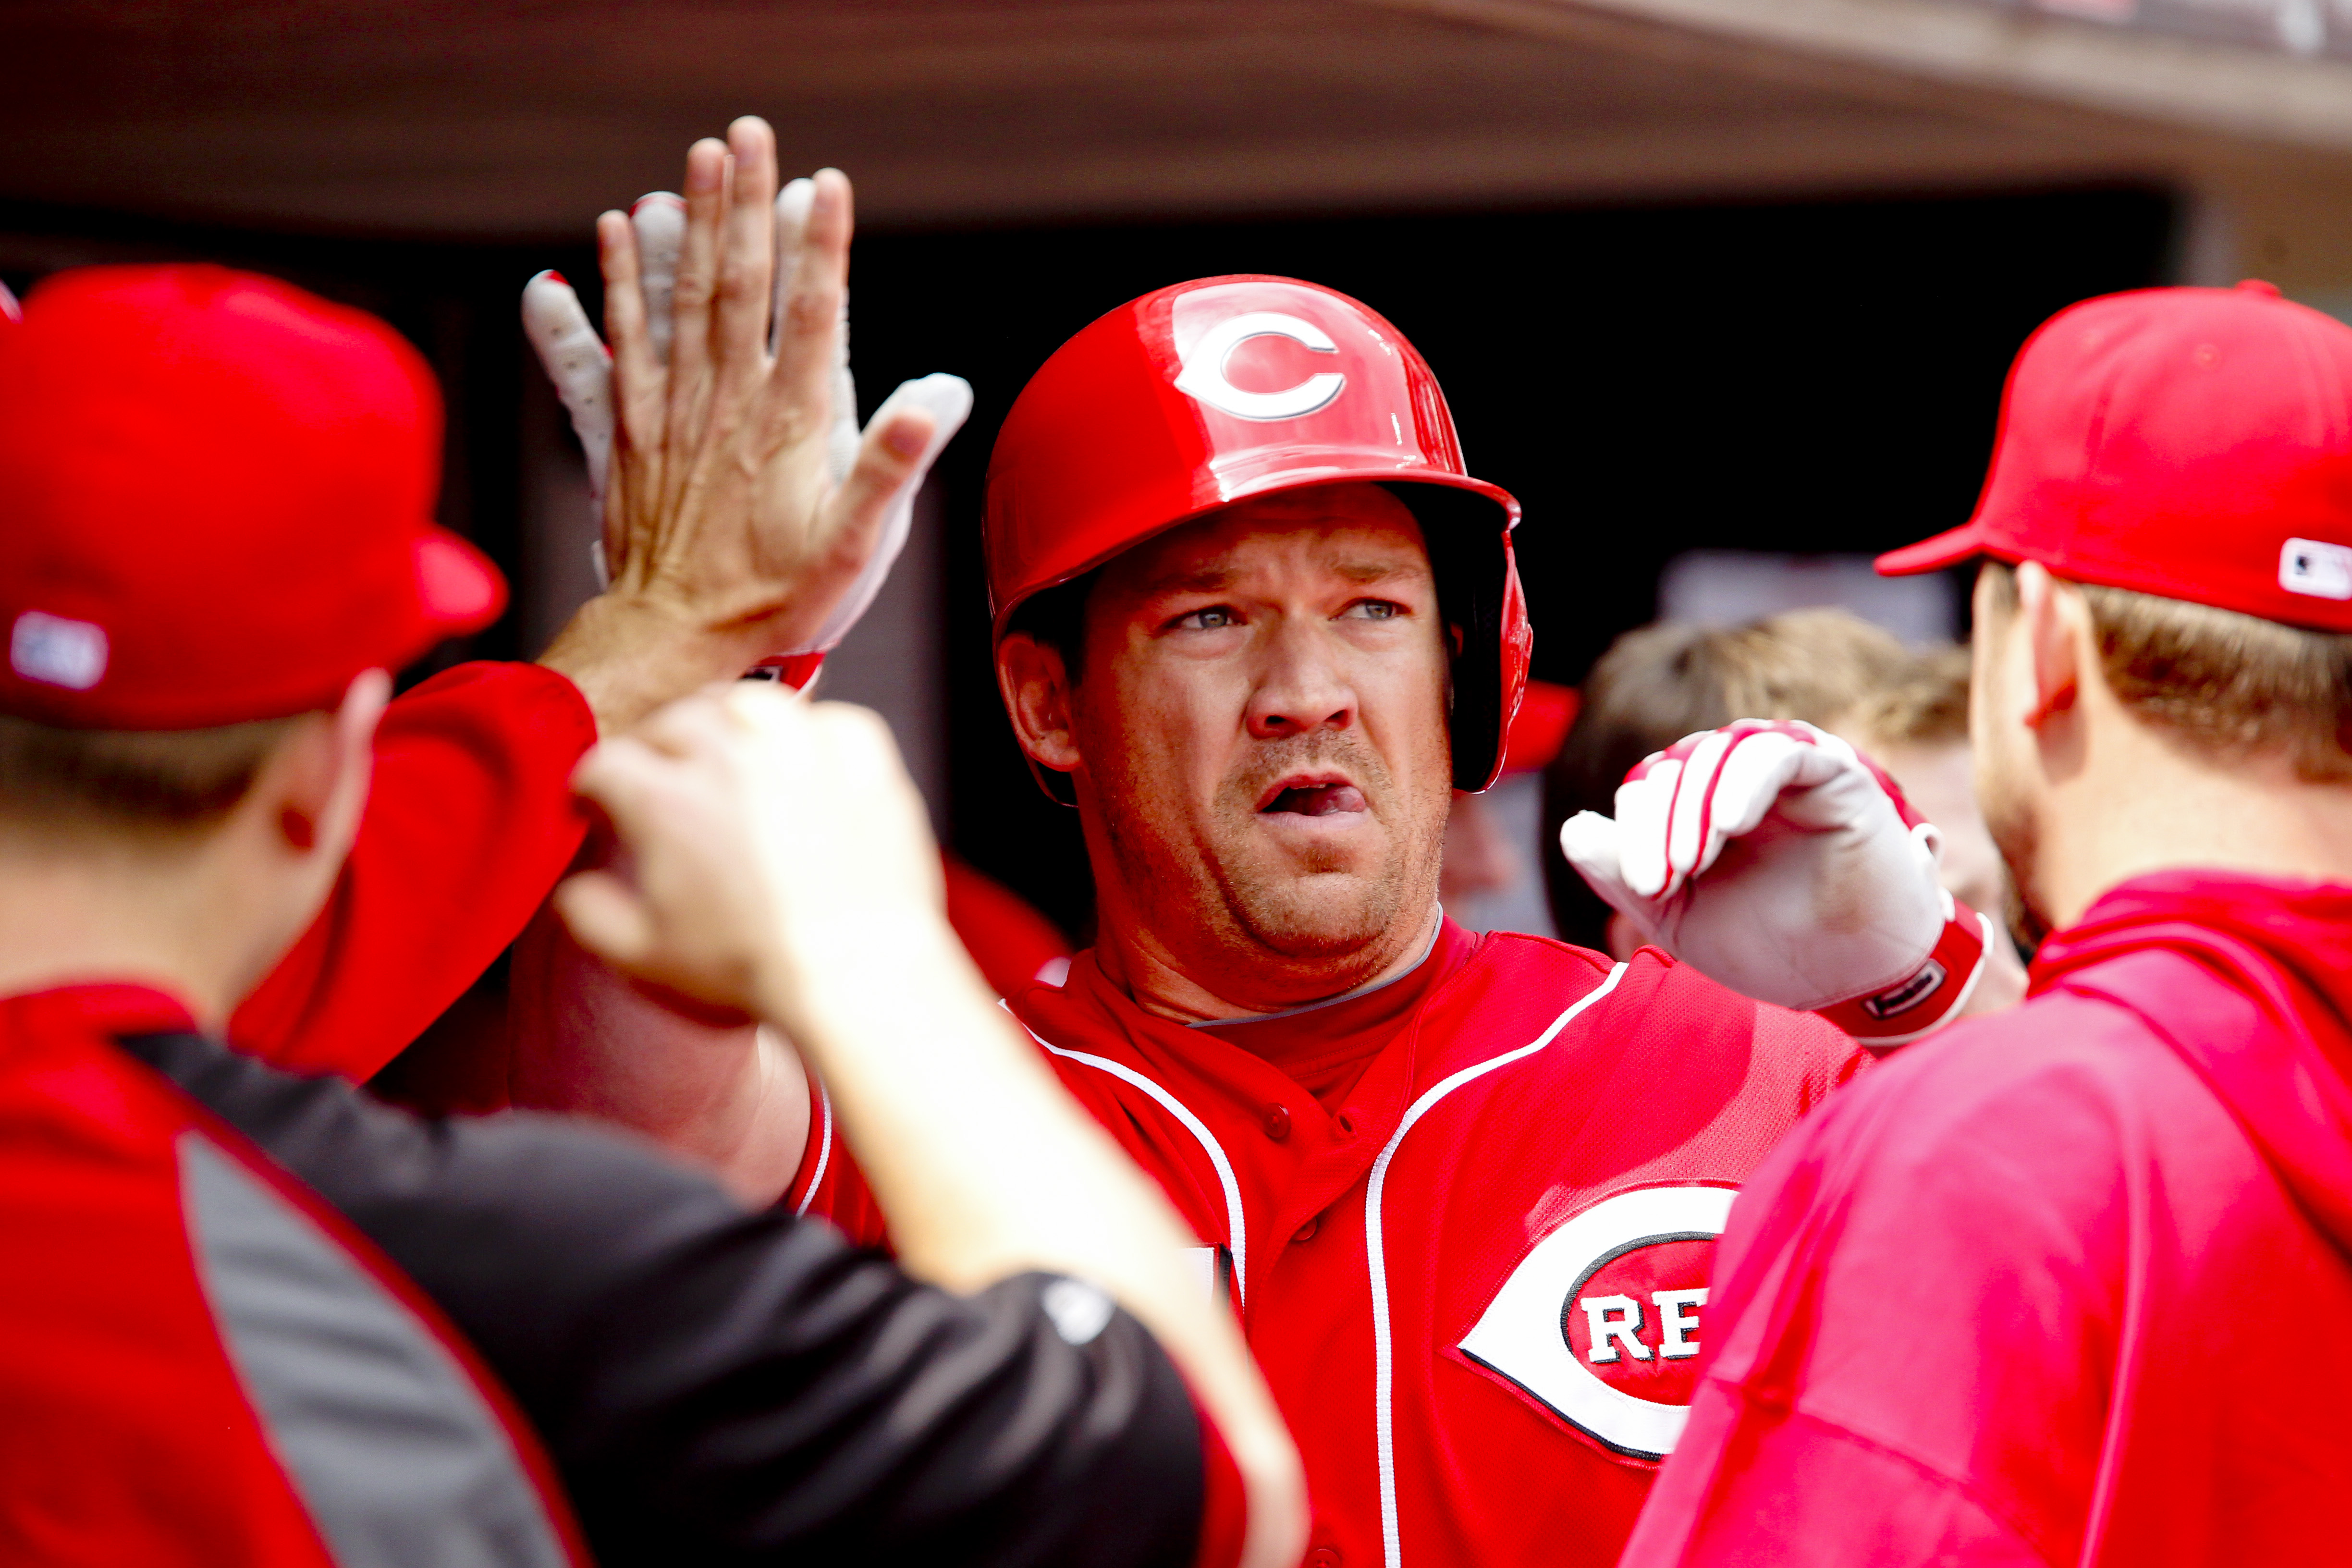 5 Things You Probably Didn't Know About Scott Rolen